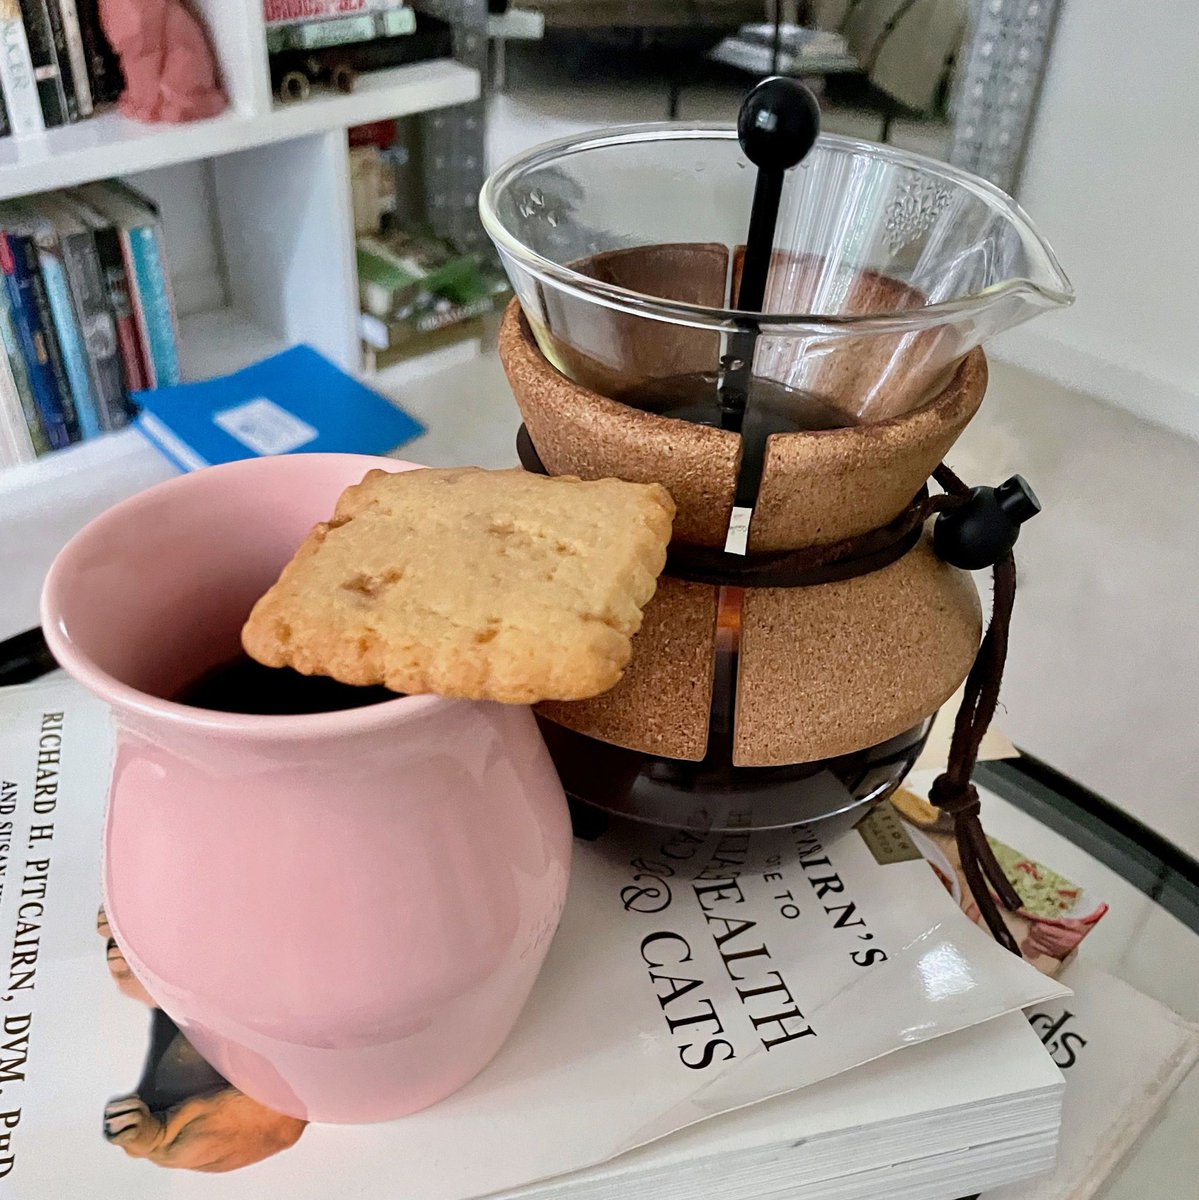 #BreakfastOfChampions Crisp, clean, naturally sweet Sumatra Woolly Rhino #coffee and a biscuit. #😋 . Learn more here: buff.ly/2lYWVS9 #TheQueenBean #CoffeeLover